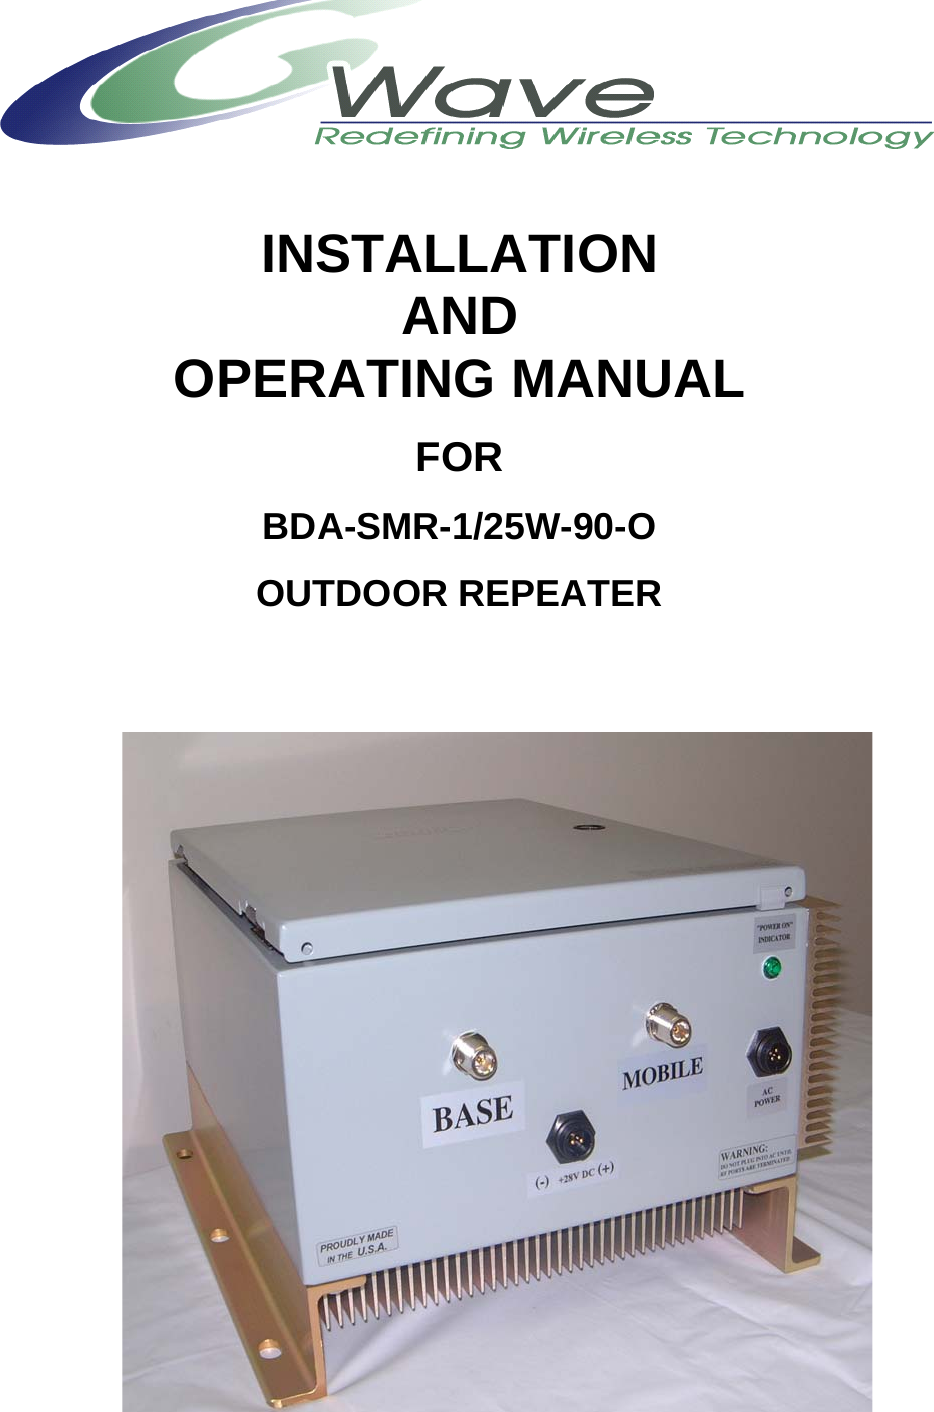  INSTALLATION AND OPERATING MANUAL  FOR  BDA-SMR-1/25W-90-O  OUTDOOR REPEATER    